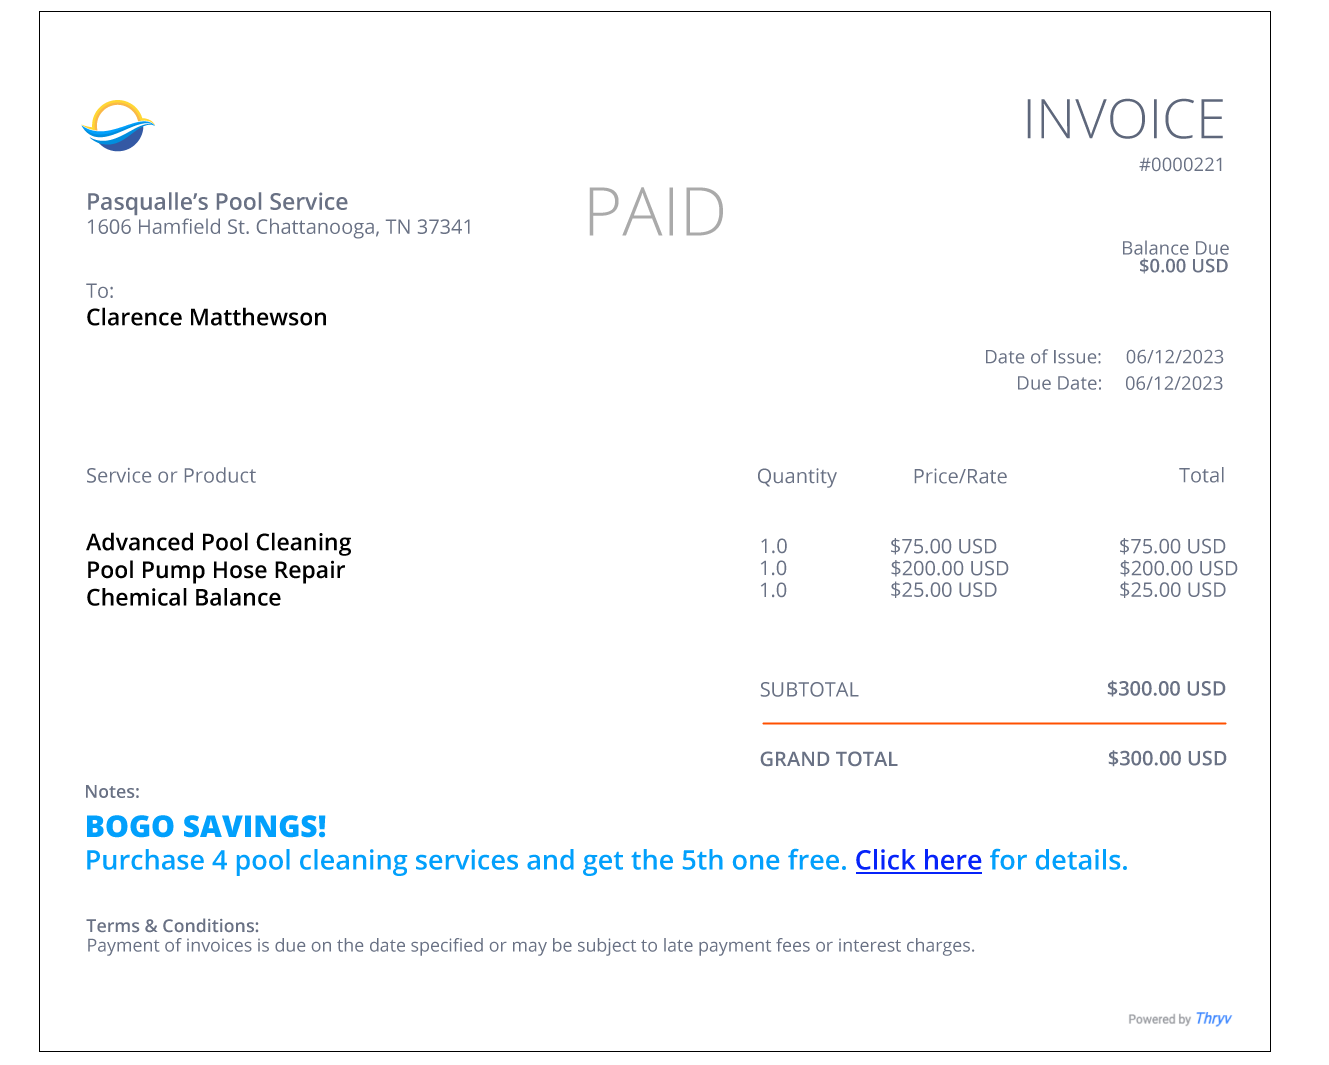 Summer Promotional Invoice Marketing Template for a Pool Company